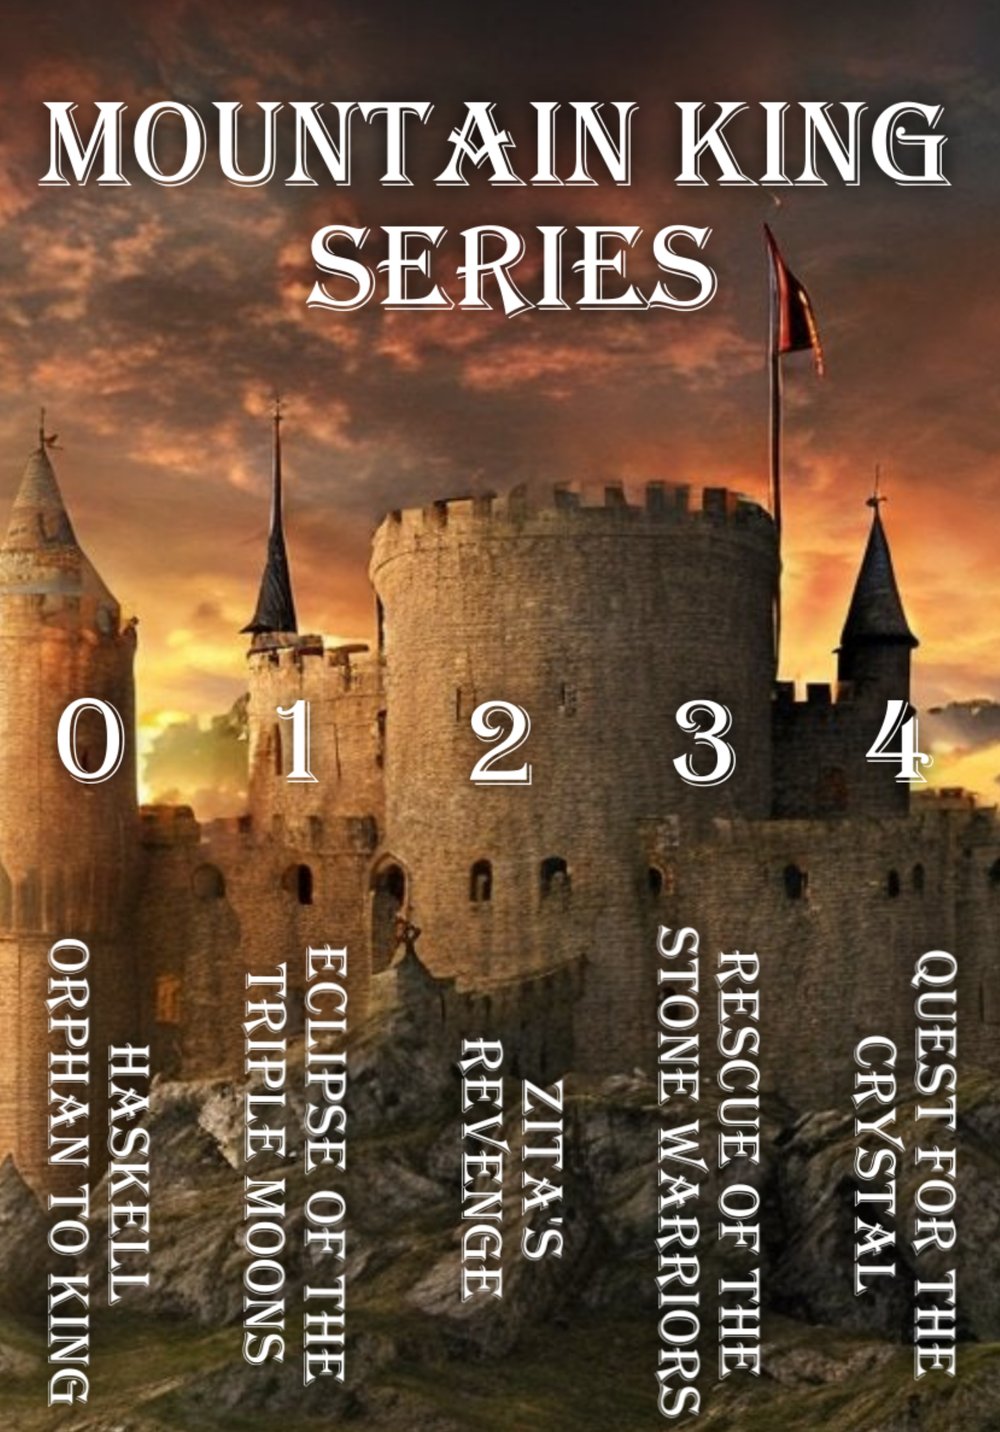 Get the first five books of the Mountain King Series for free as a member of the Fantasy Action Adventure Club